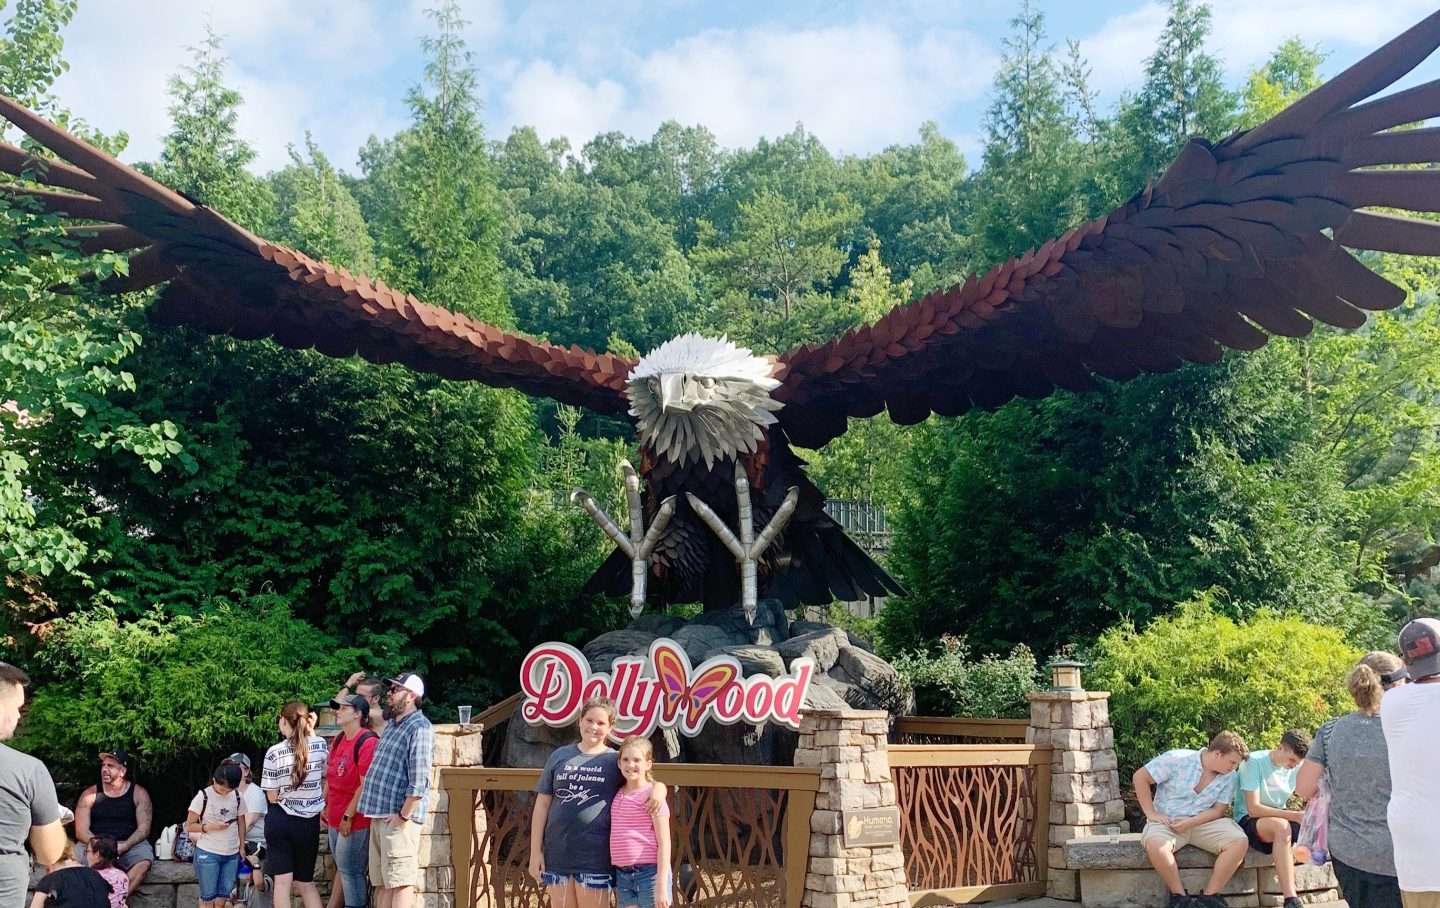 Dollywood Theme Park in Pigeon Forge, TN.